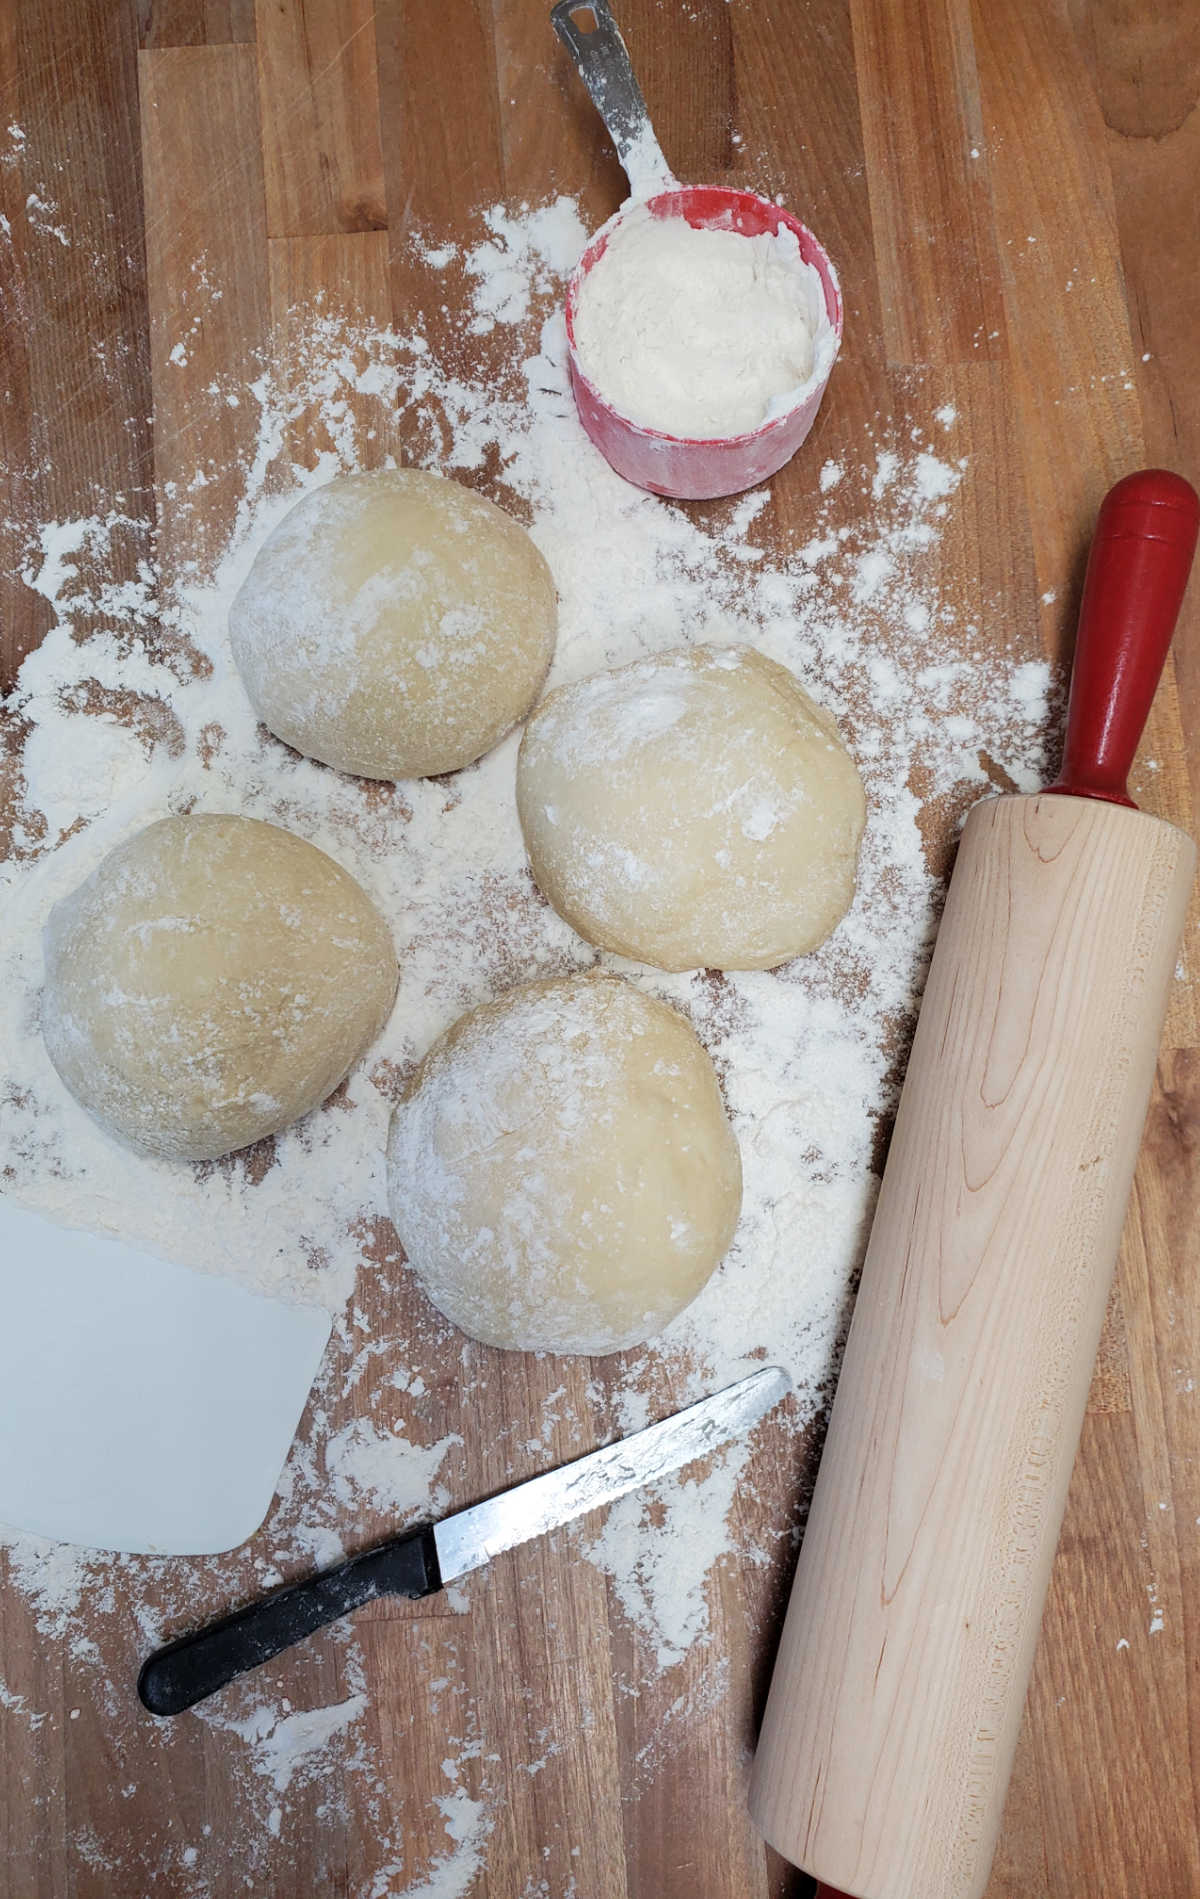 Four rounds of pizza dough rising on butcher block, red handled rolling pin to side.